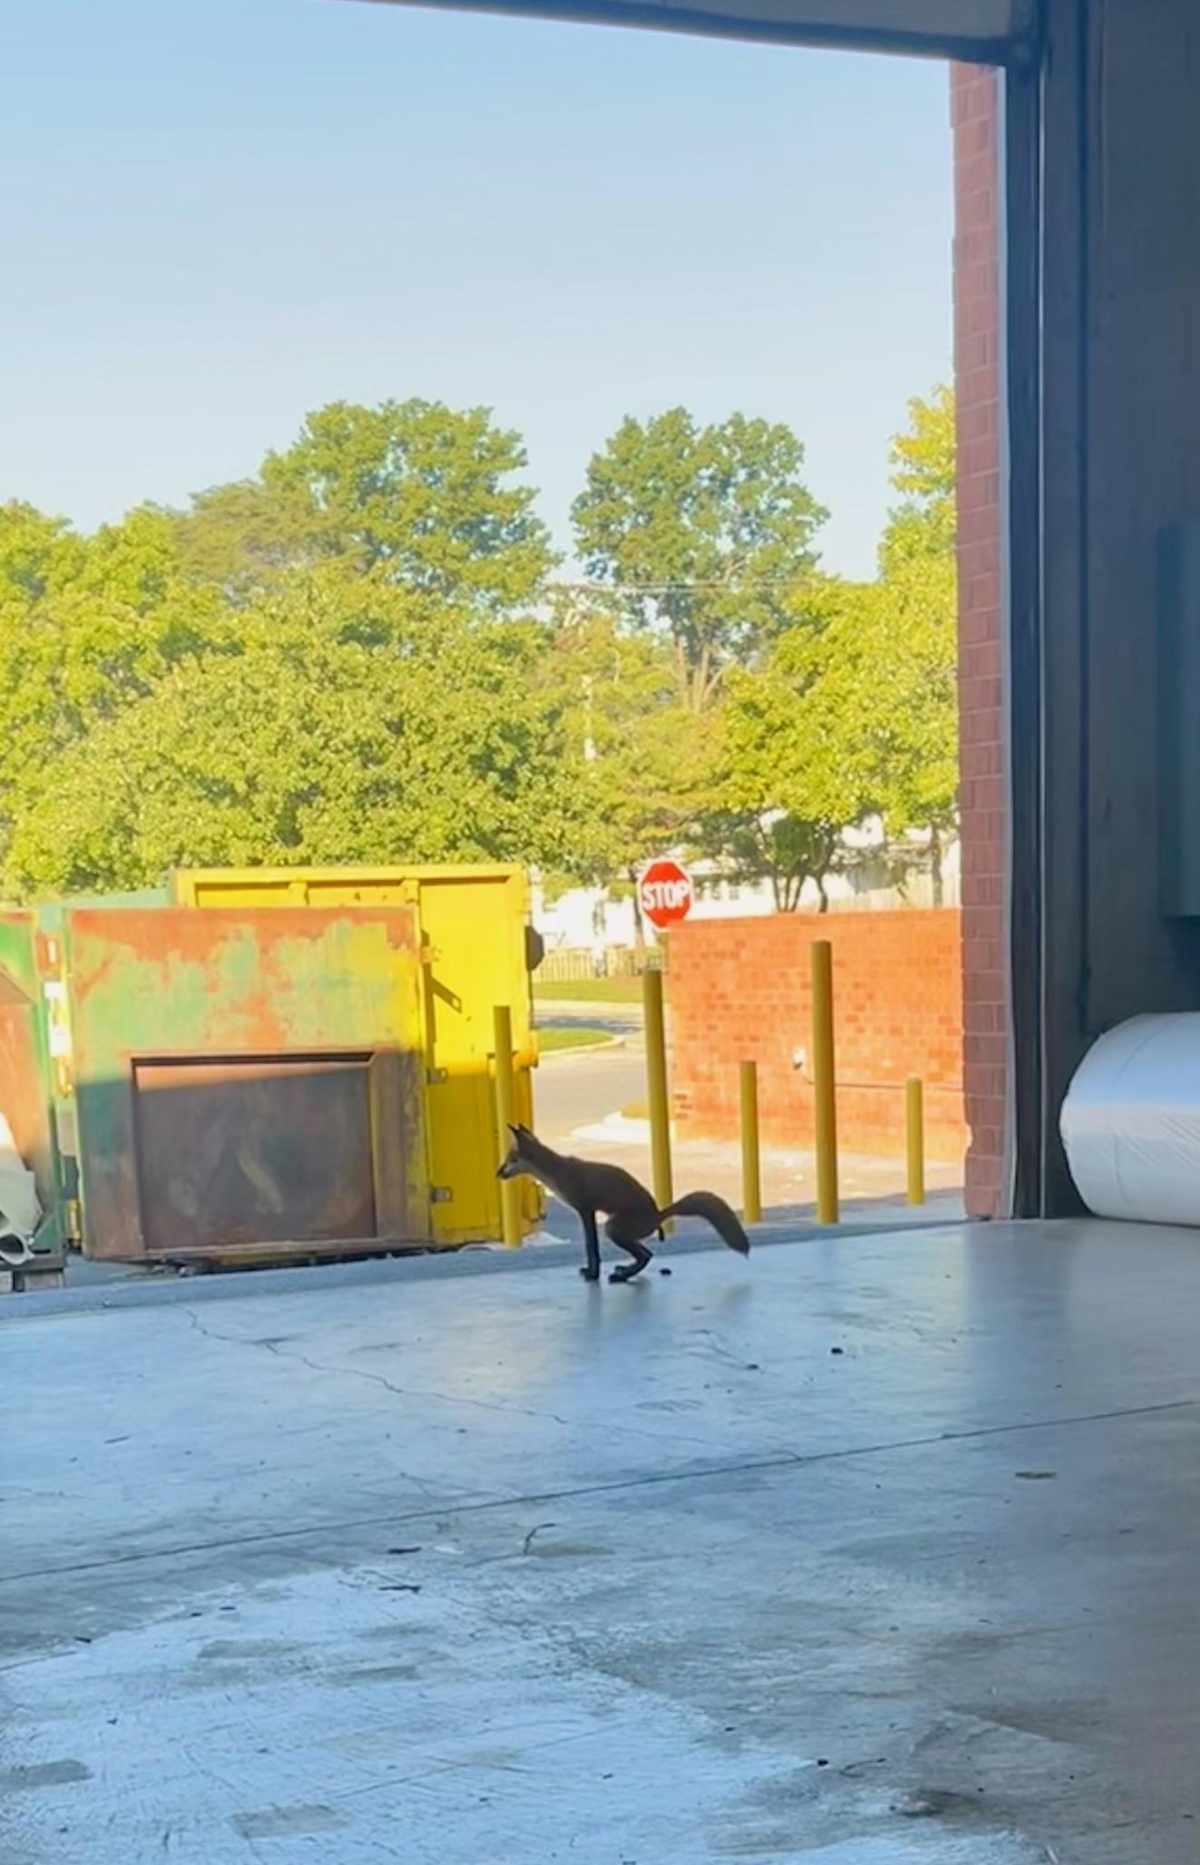 This fox walked into our warehouse, took a poop on the floor, and then left